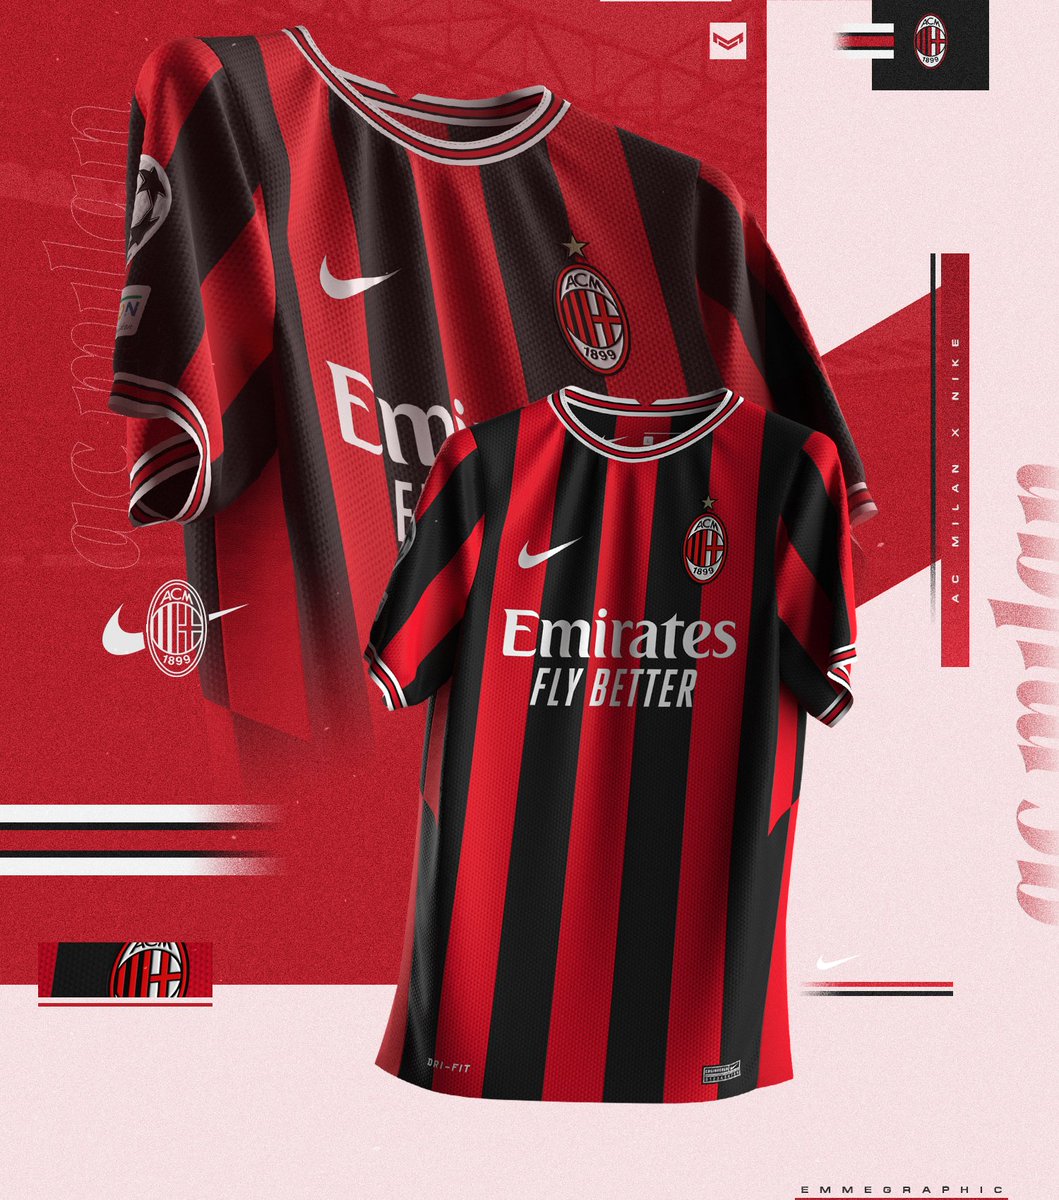 Grammatica Supplement meerderheid emmegraphic on Twitter: "🖌️⚽ | 𝗔𝗖 𝗠𝗶𝗹𝗮𝗻 • #Nike | home jersey  concept • 💬 | What do you think? Drop a comment All the logos on this  concept jersey are